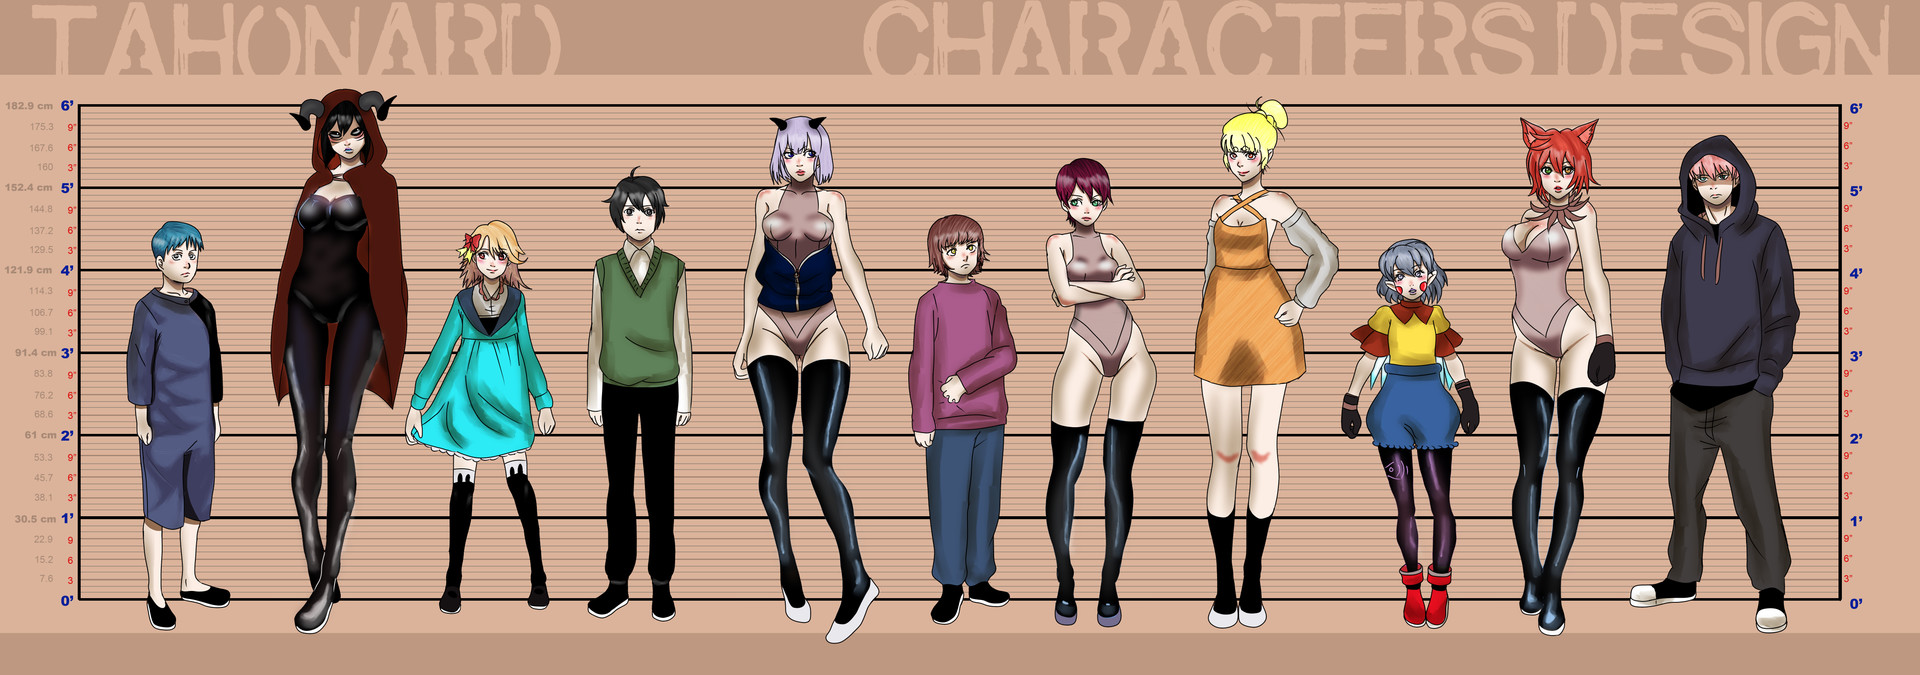 Fairy Tail characters height | Anime Amino